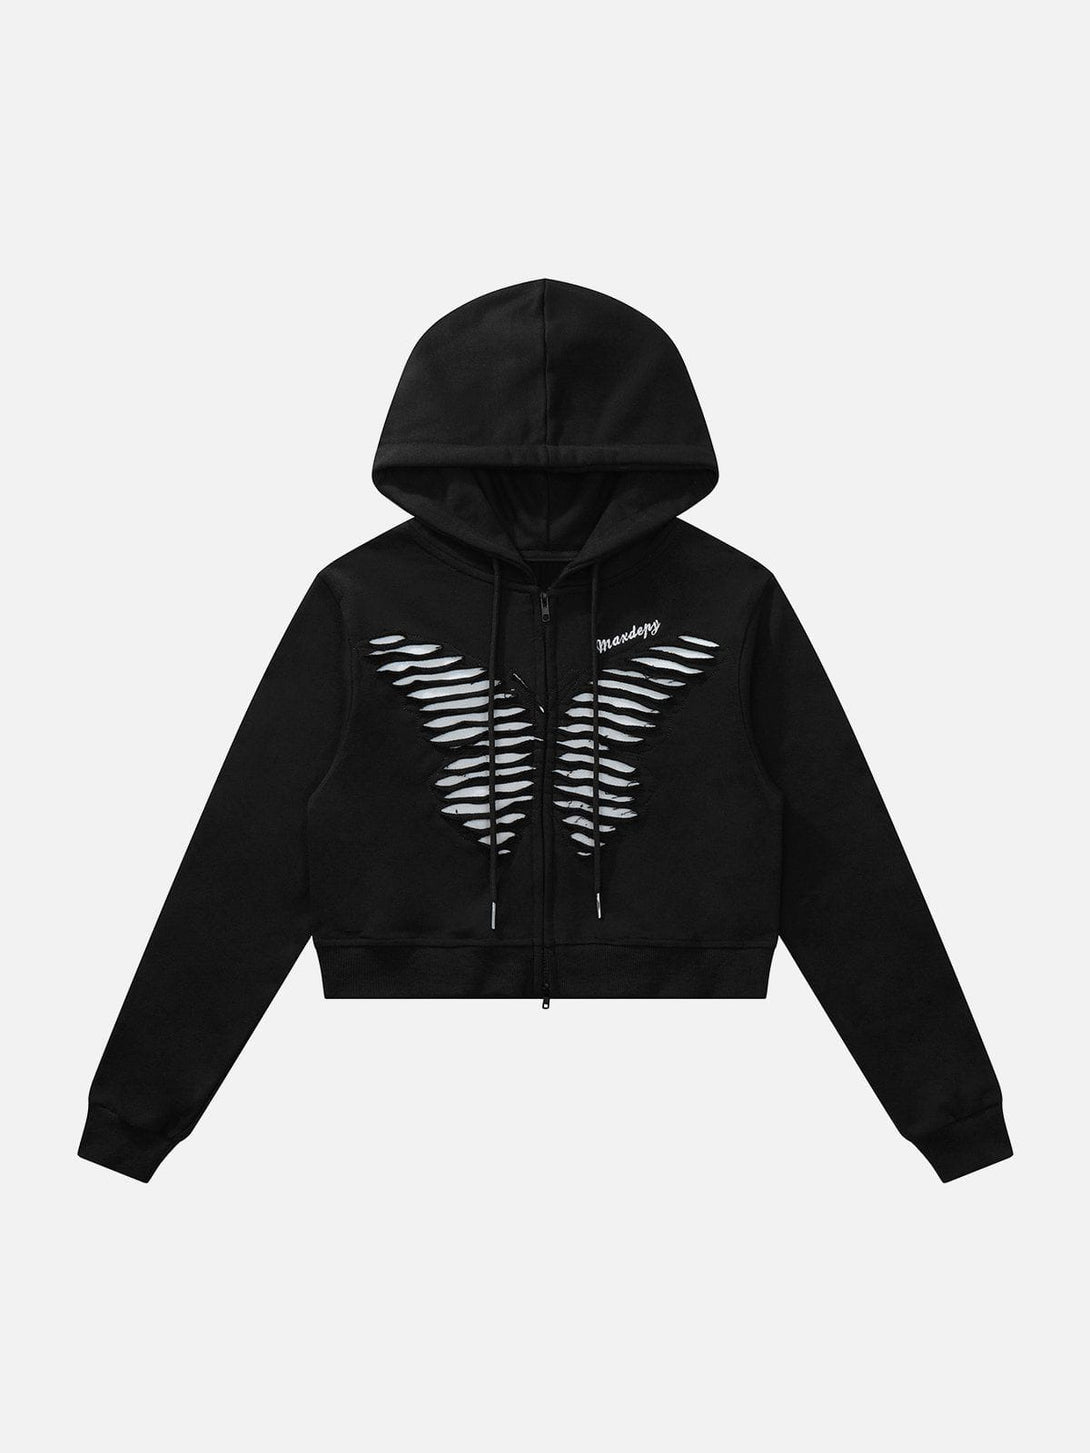 Majesda® - Holey Butterfly Regular Hoodie outfit ideas streetwear fashion